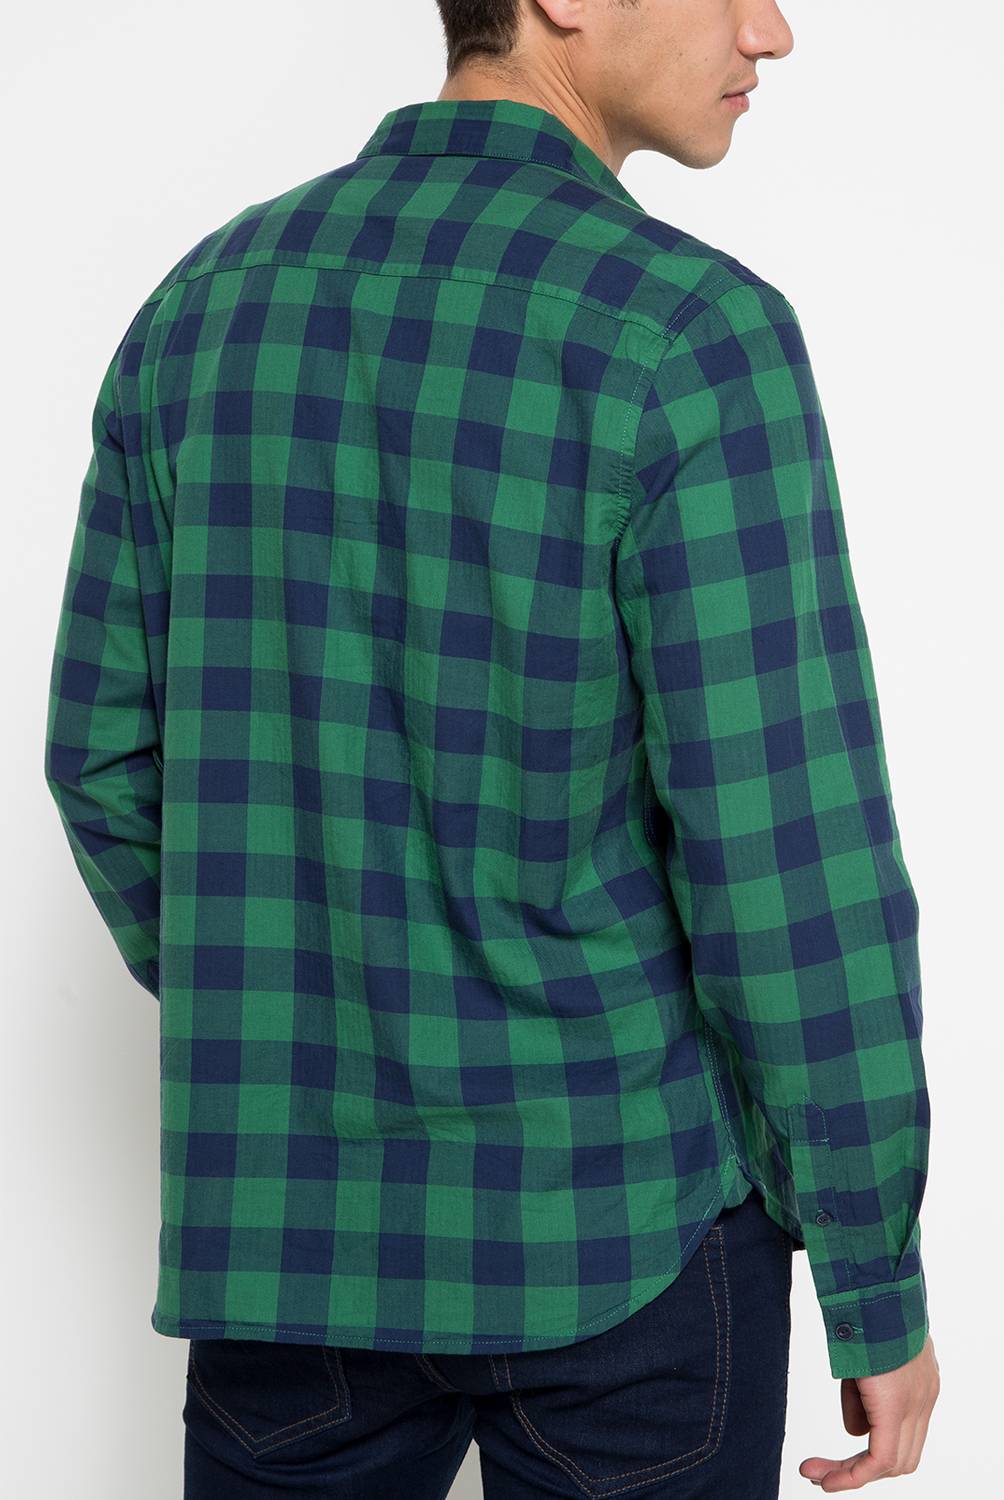 BEARCLIFF - Camisa Hombre